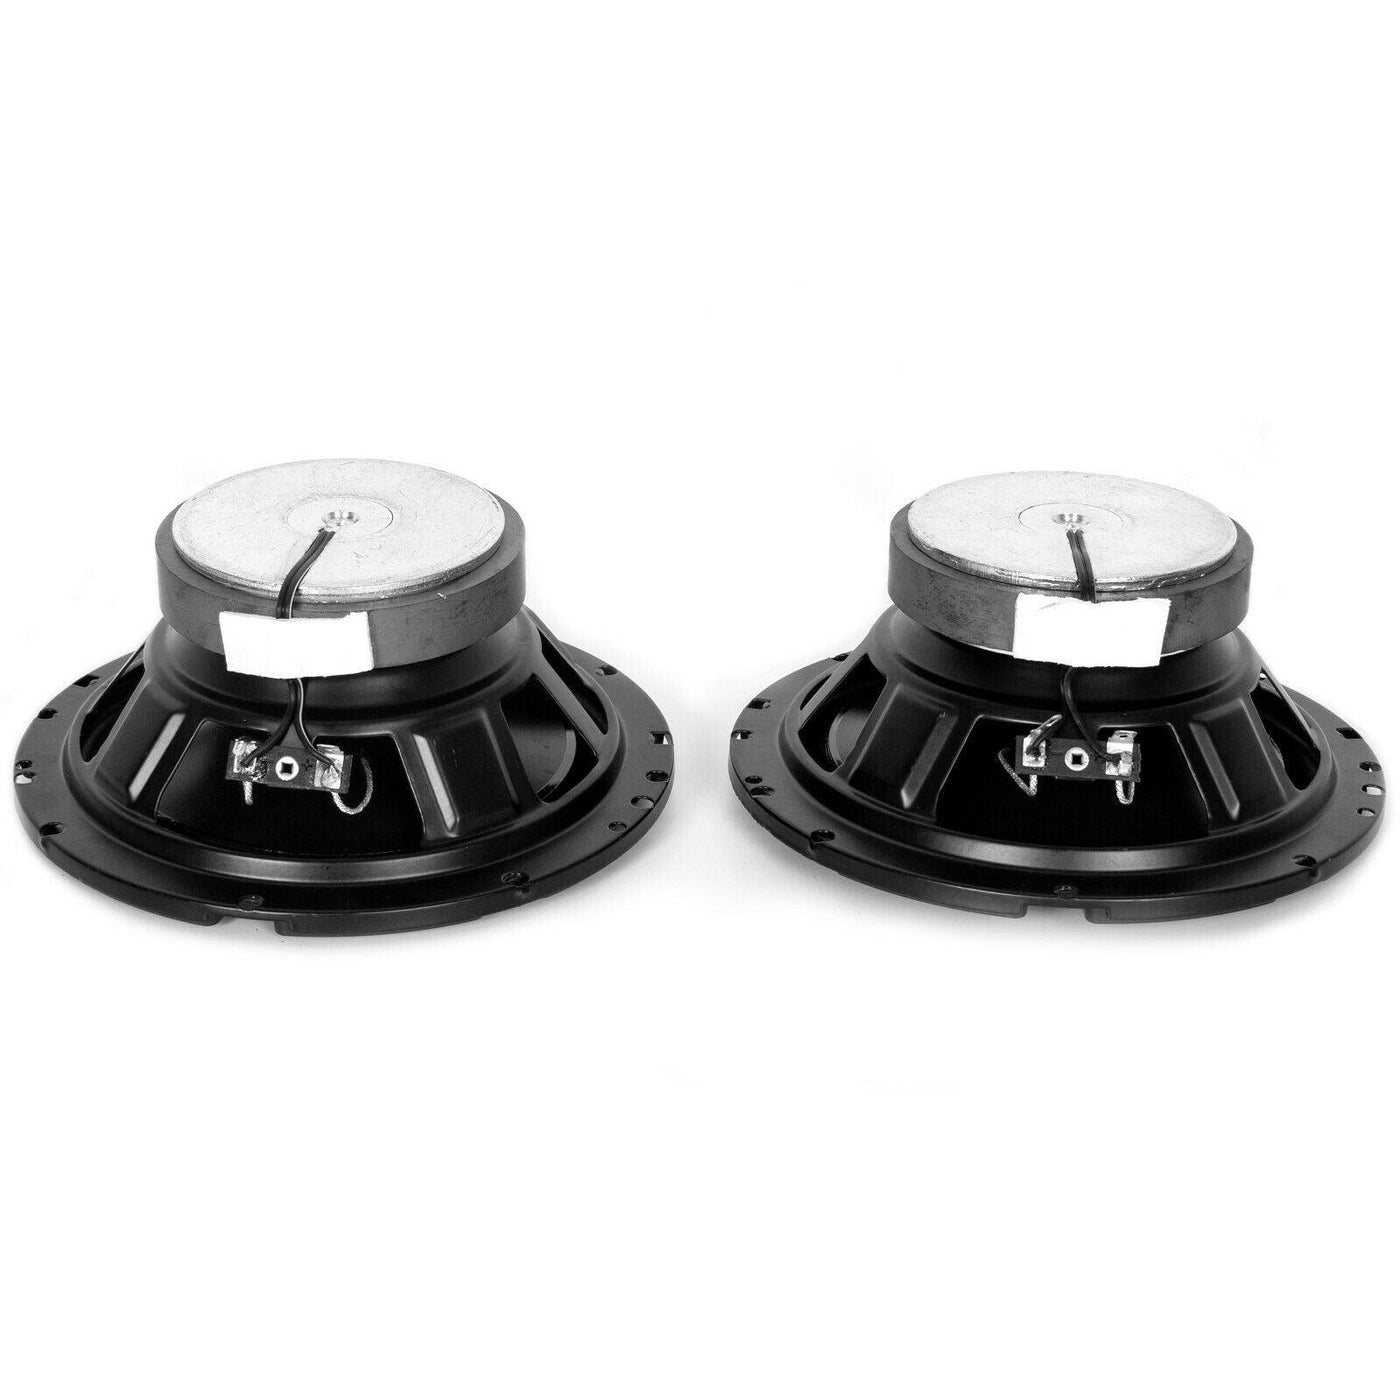 For Harley Davidson Touring Lower Vented Fairing 6.5" Speakers Grill Box Pods - Moto Life Products